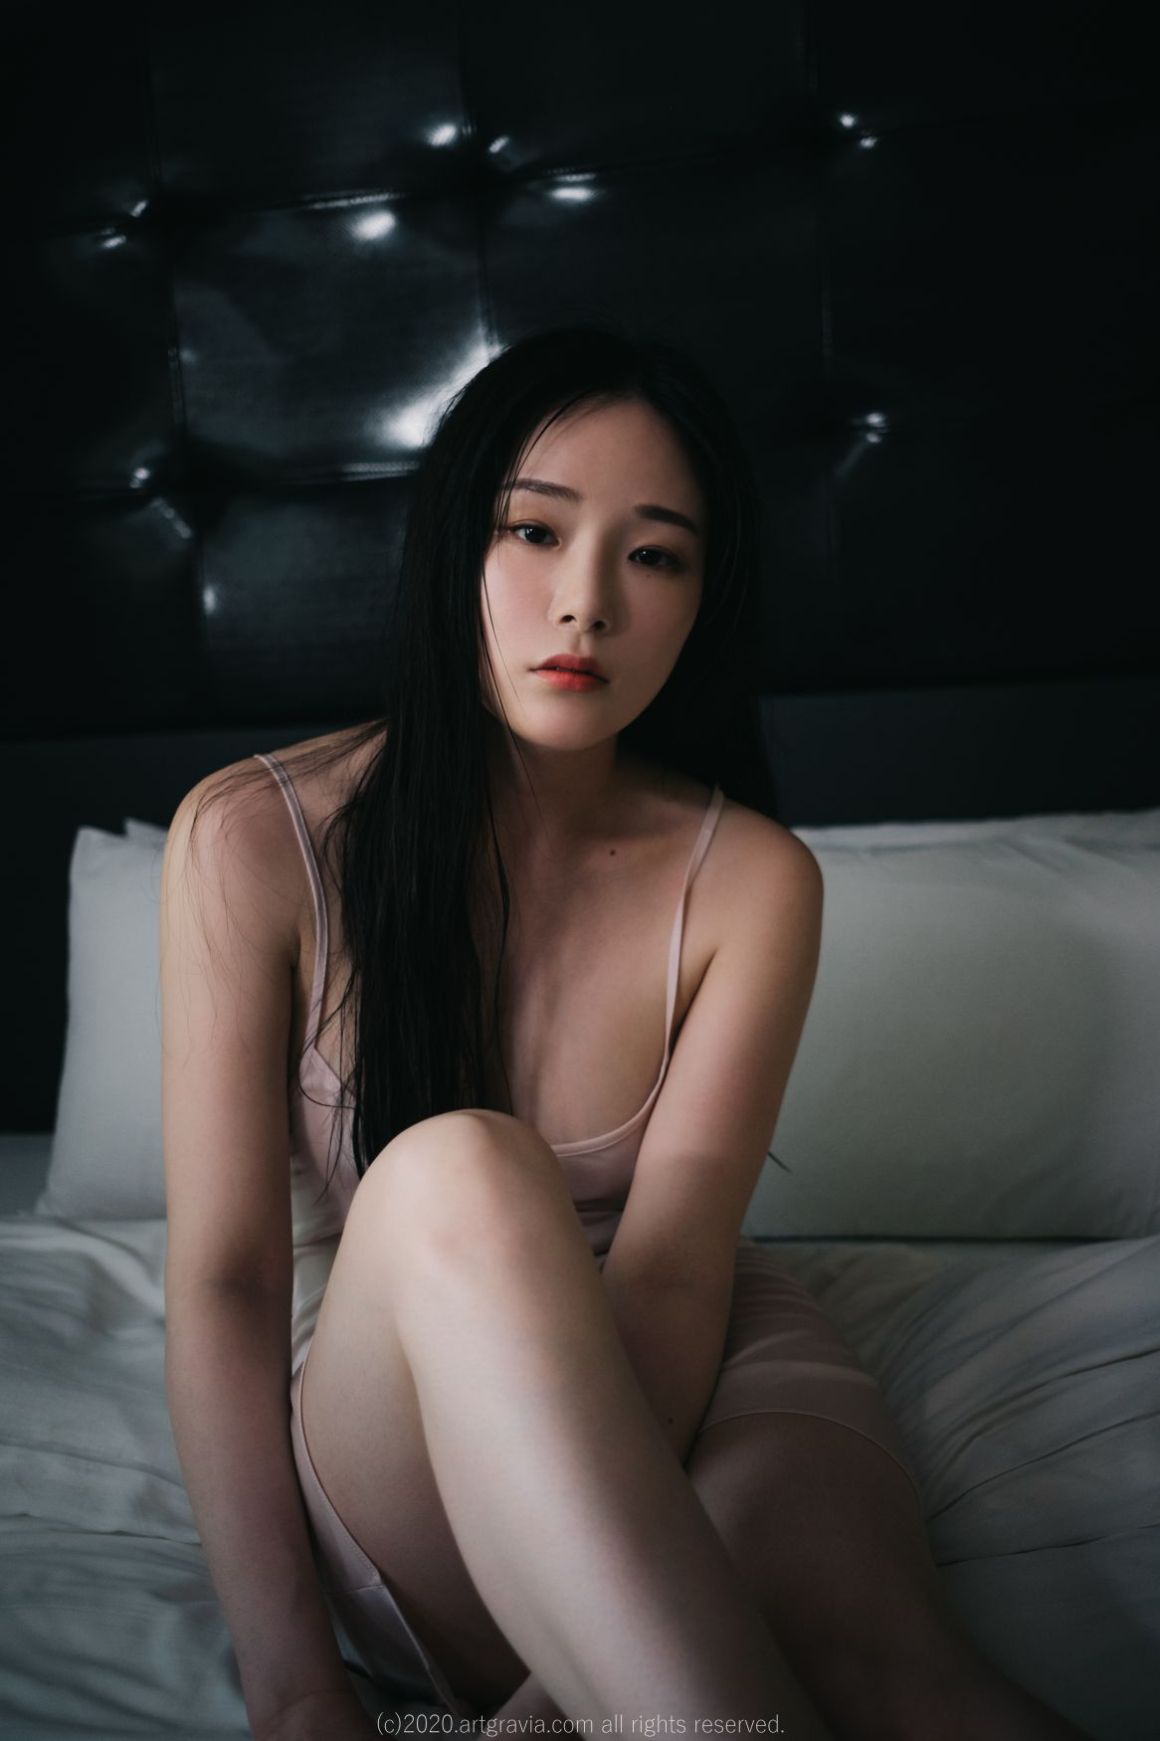 AsianOnlyfans.com 57 113 20211010